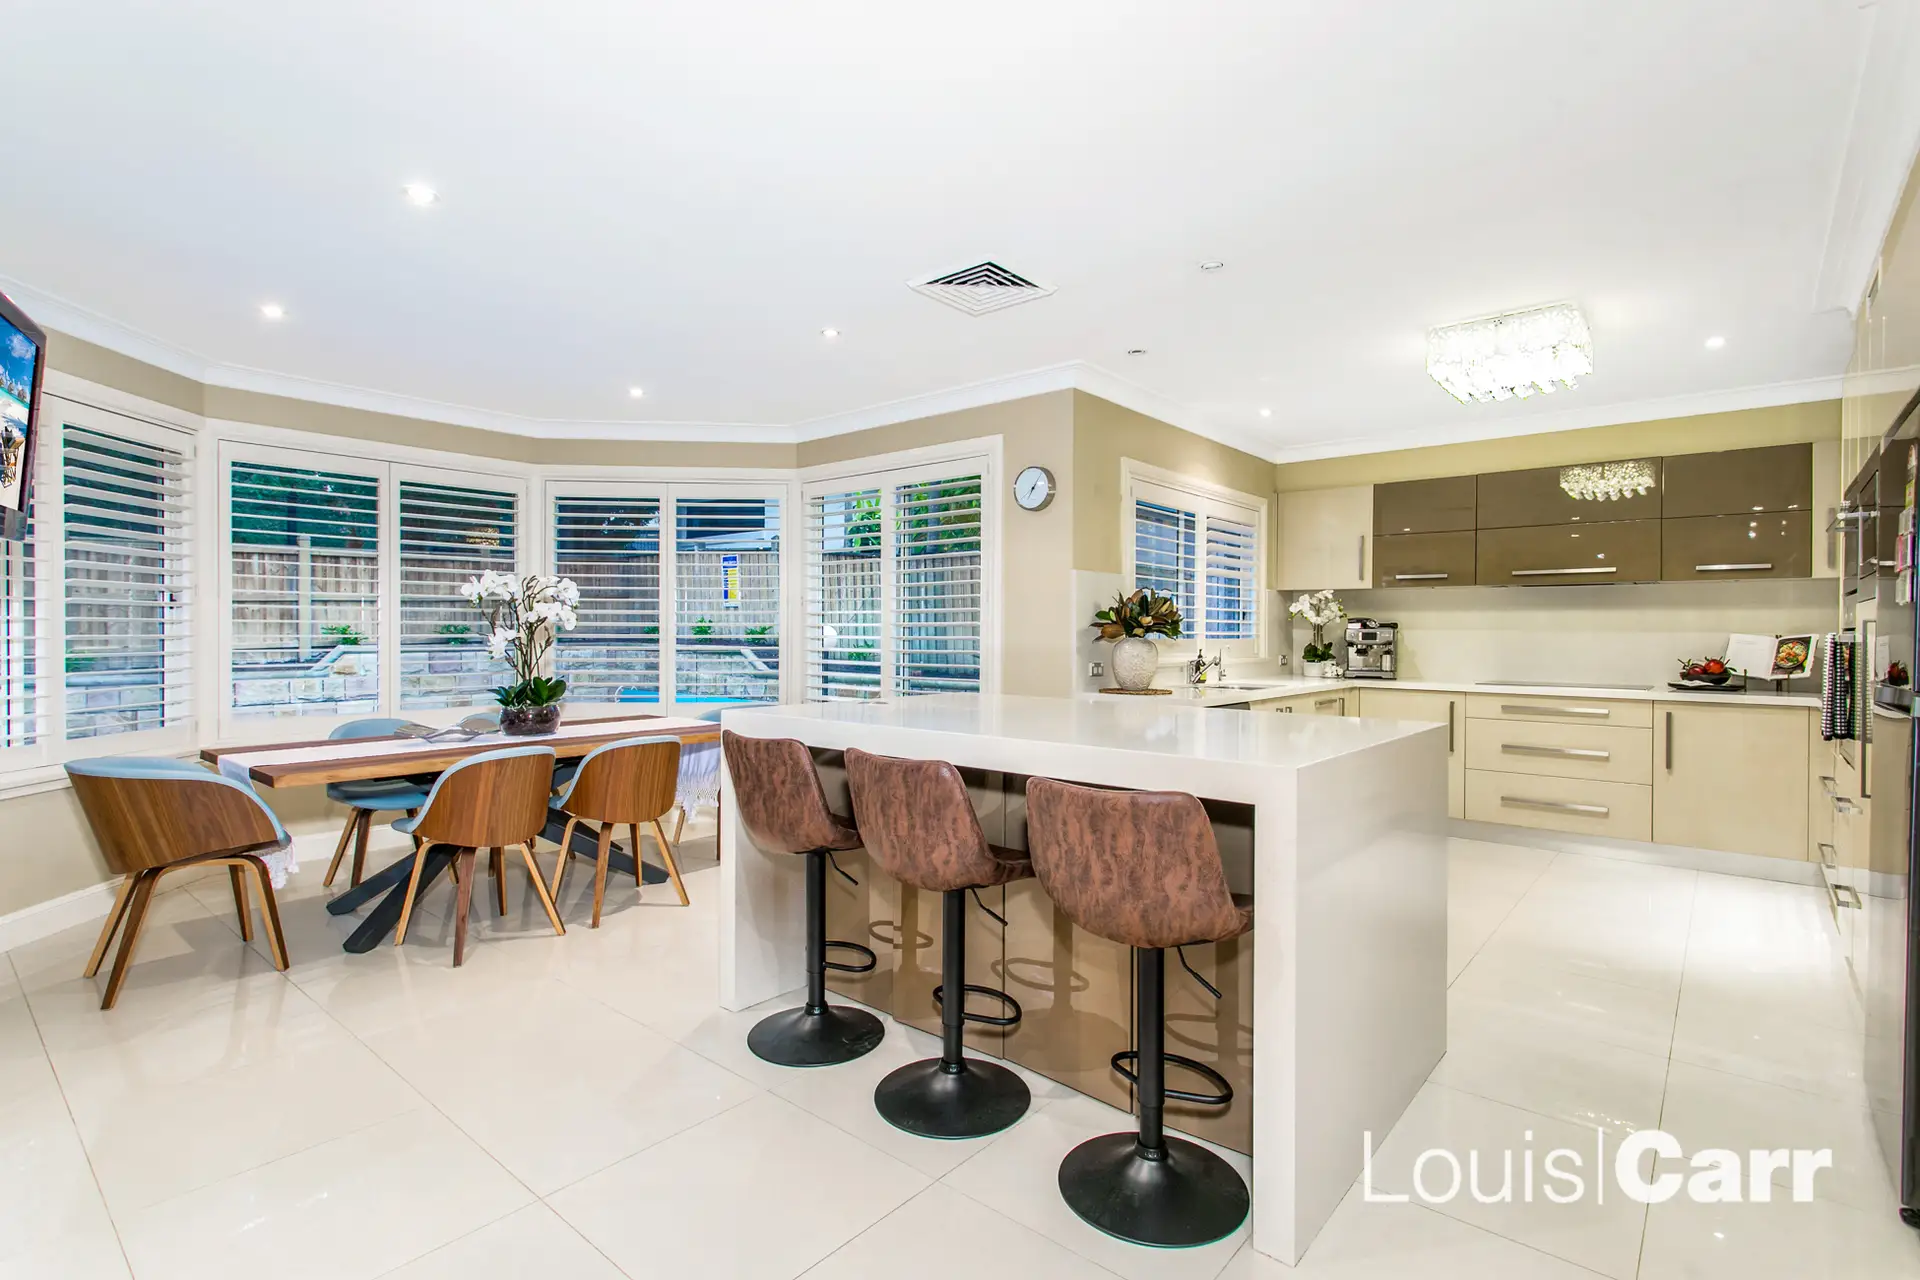 Photo #3: 5 Rodney Place, West Pennant Hills - Sold by Louis Carr Real Estate